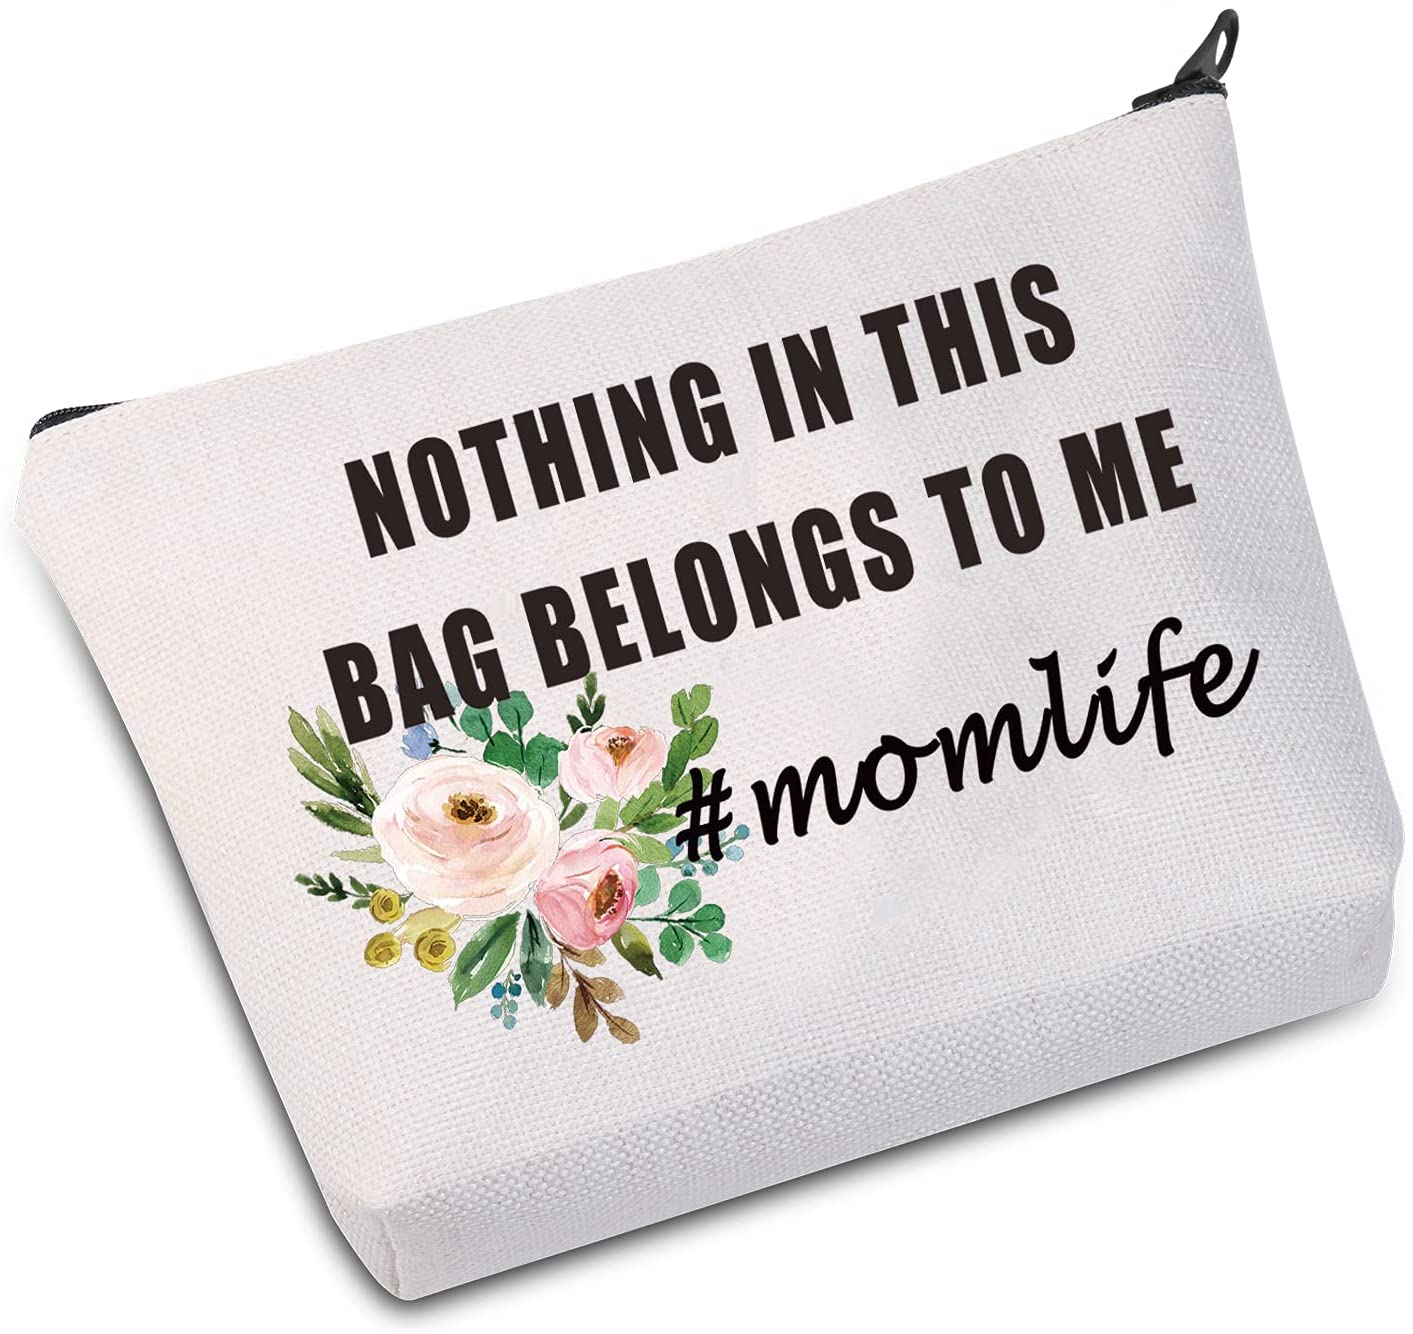 Zuo Bao New Mom Gift Nothing In This Bag Belongs To Me Family Bag Mom Life Gift Mothers Day Gift (Family Bag White Bag) - image 1 of 7